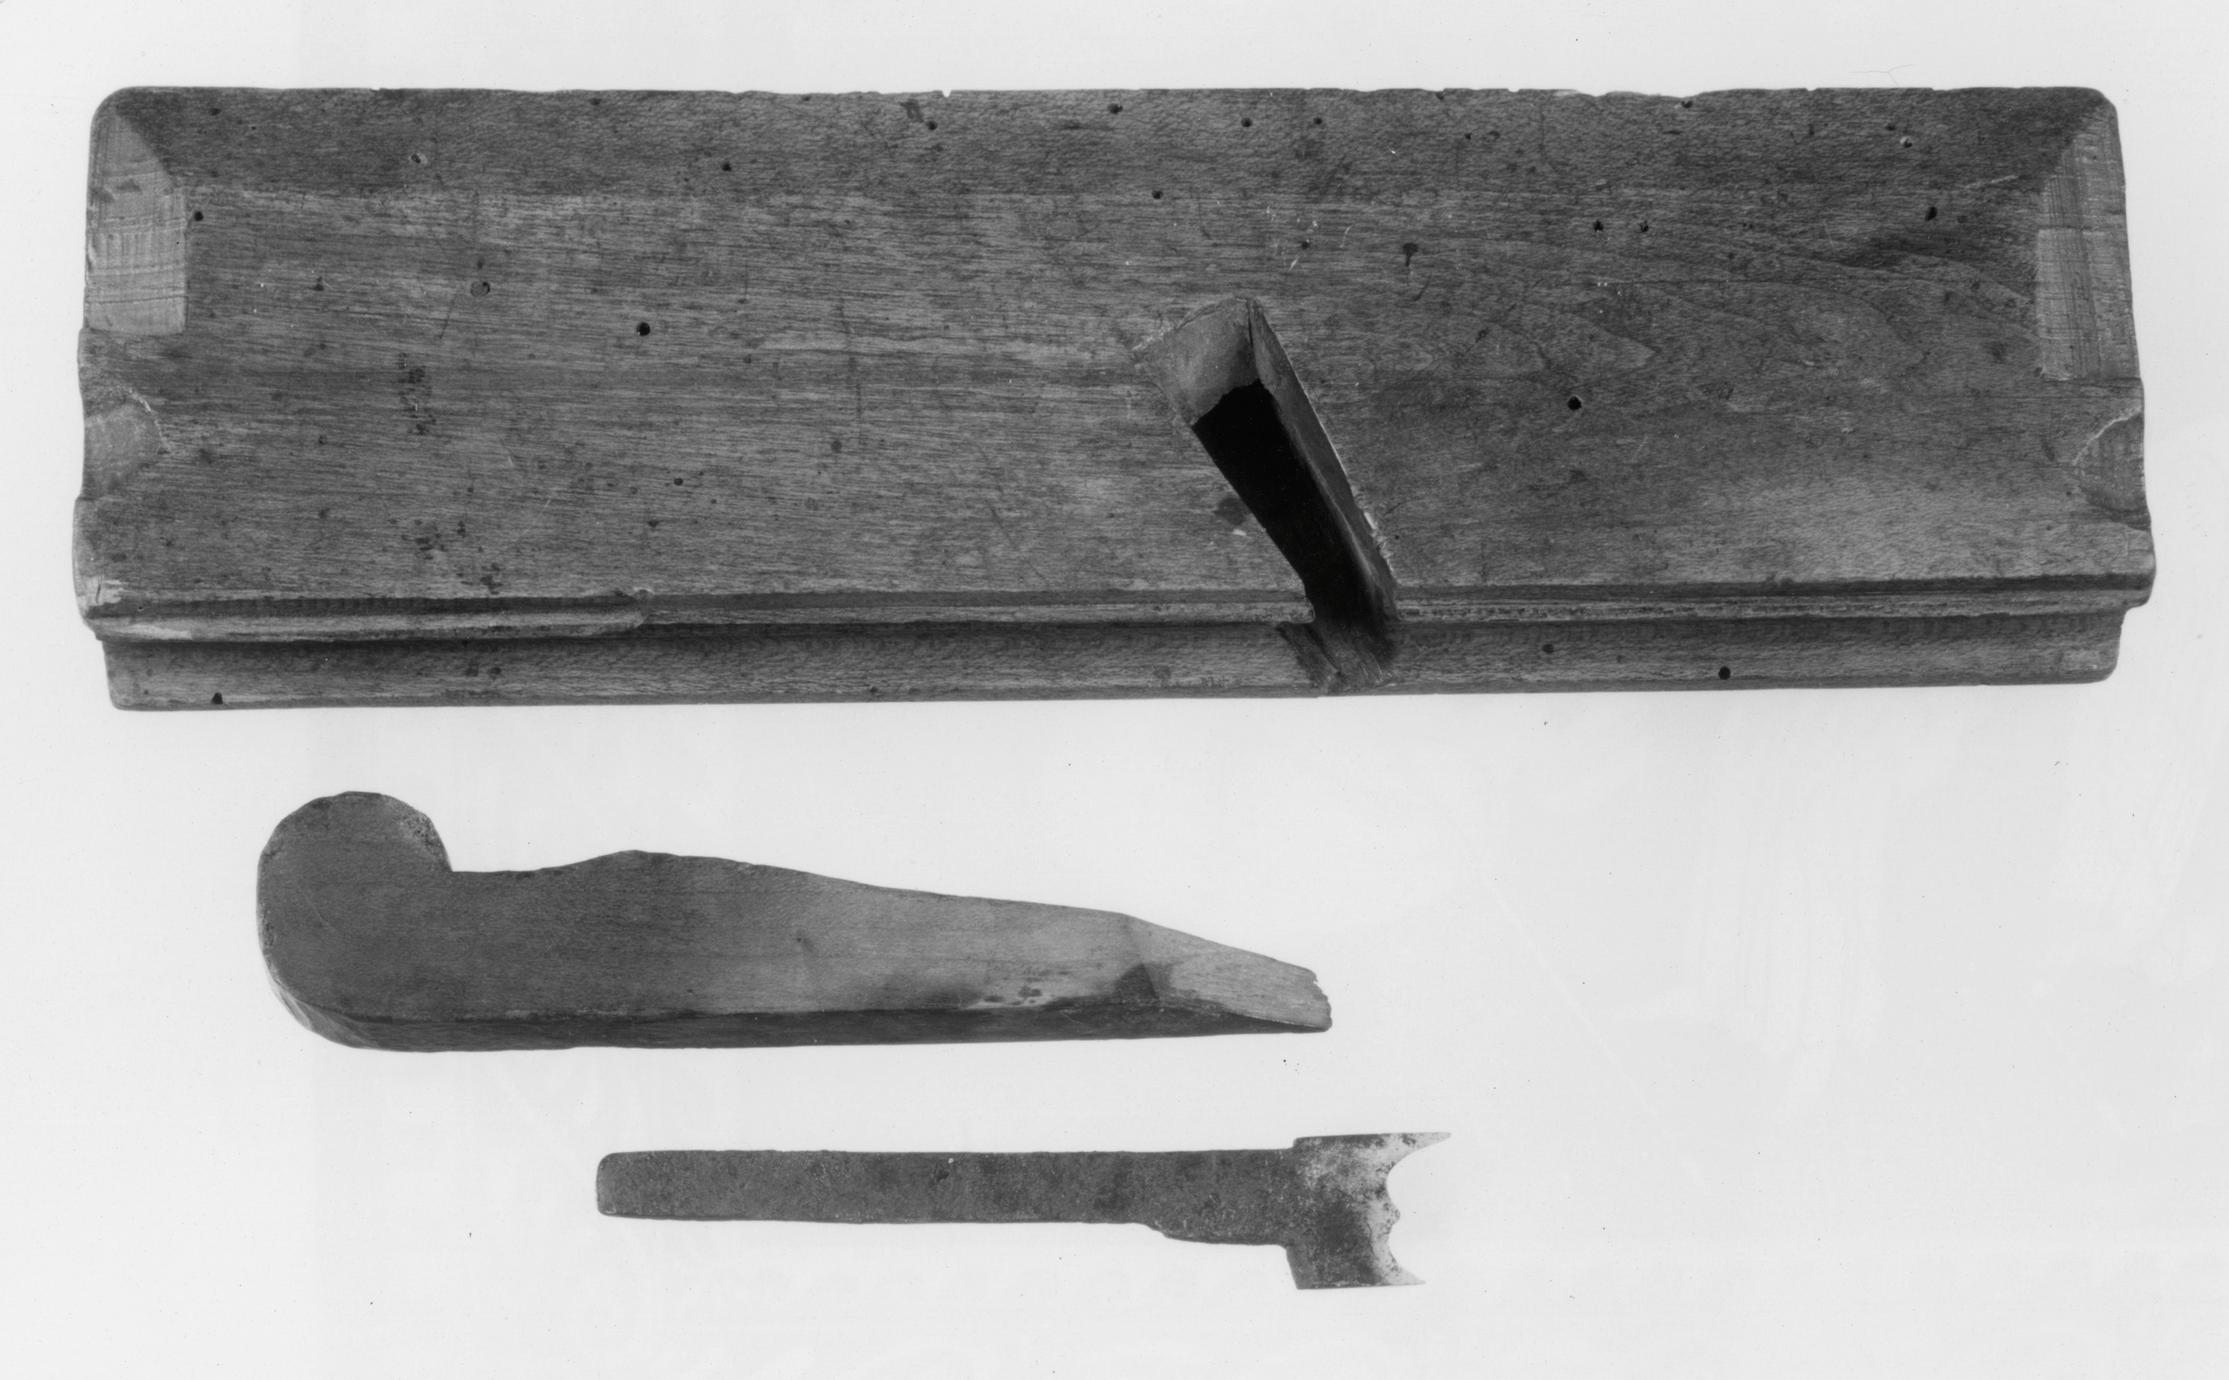 Black and white photo of a double bead plane.